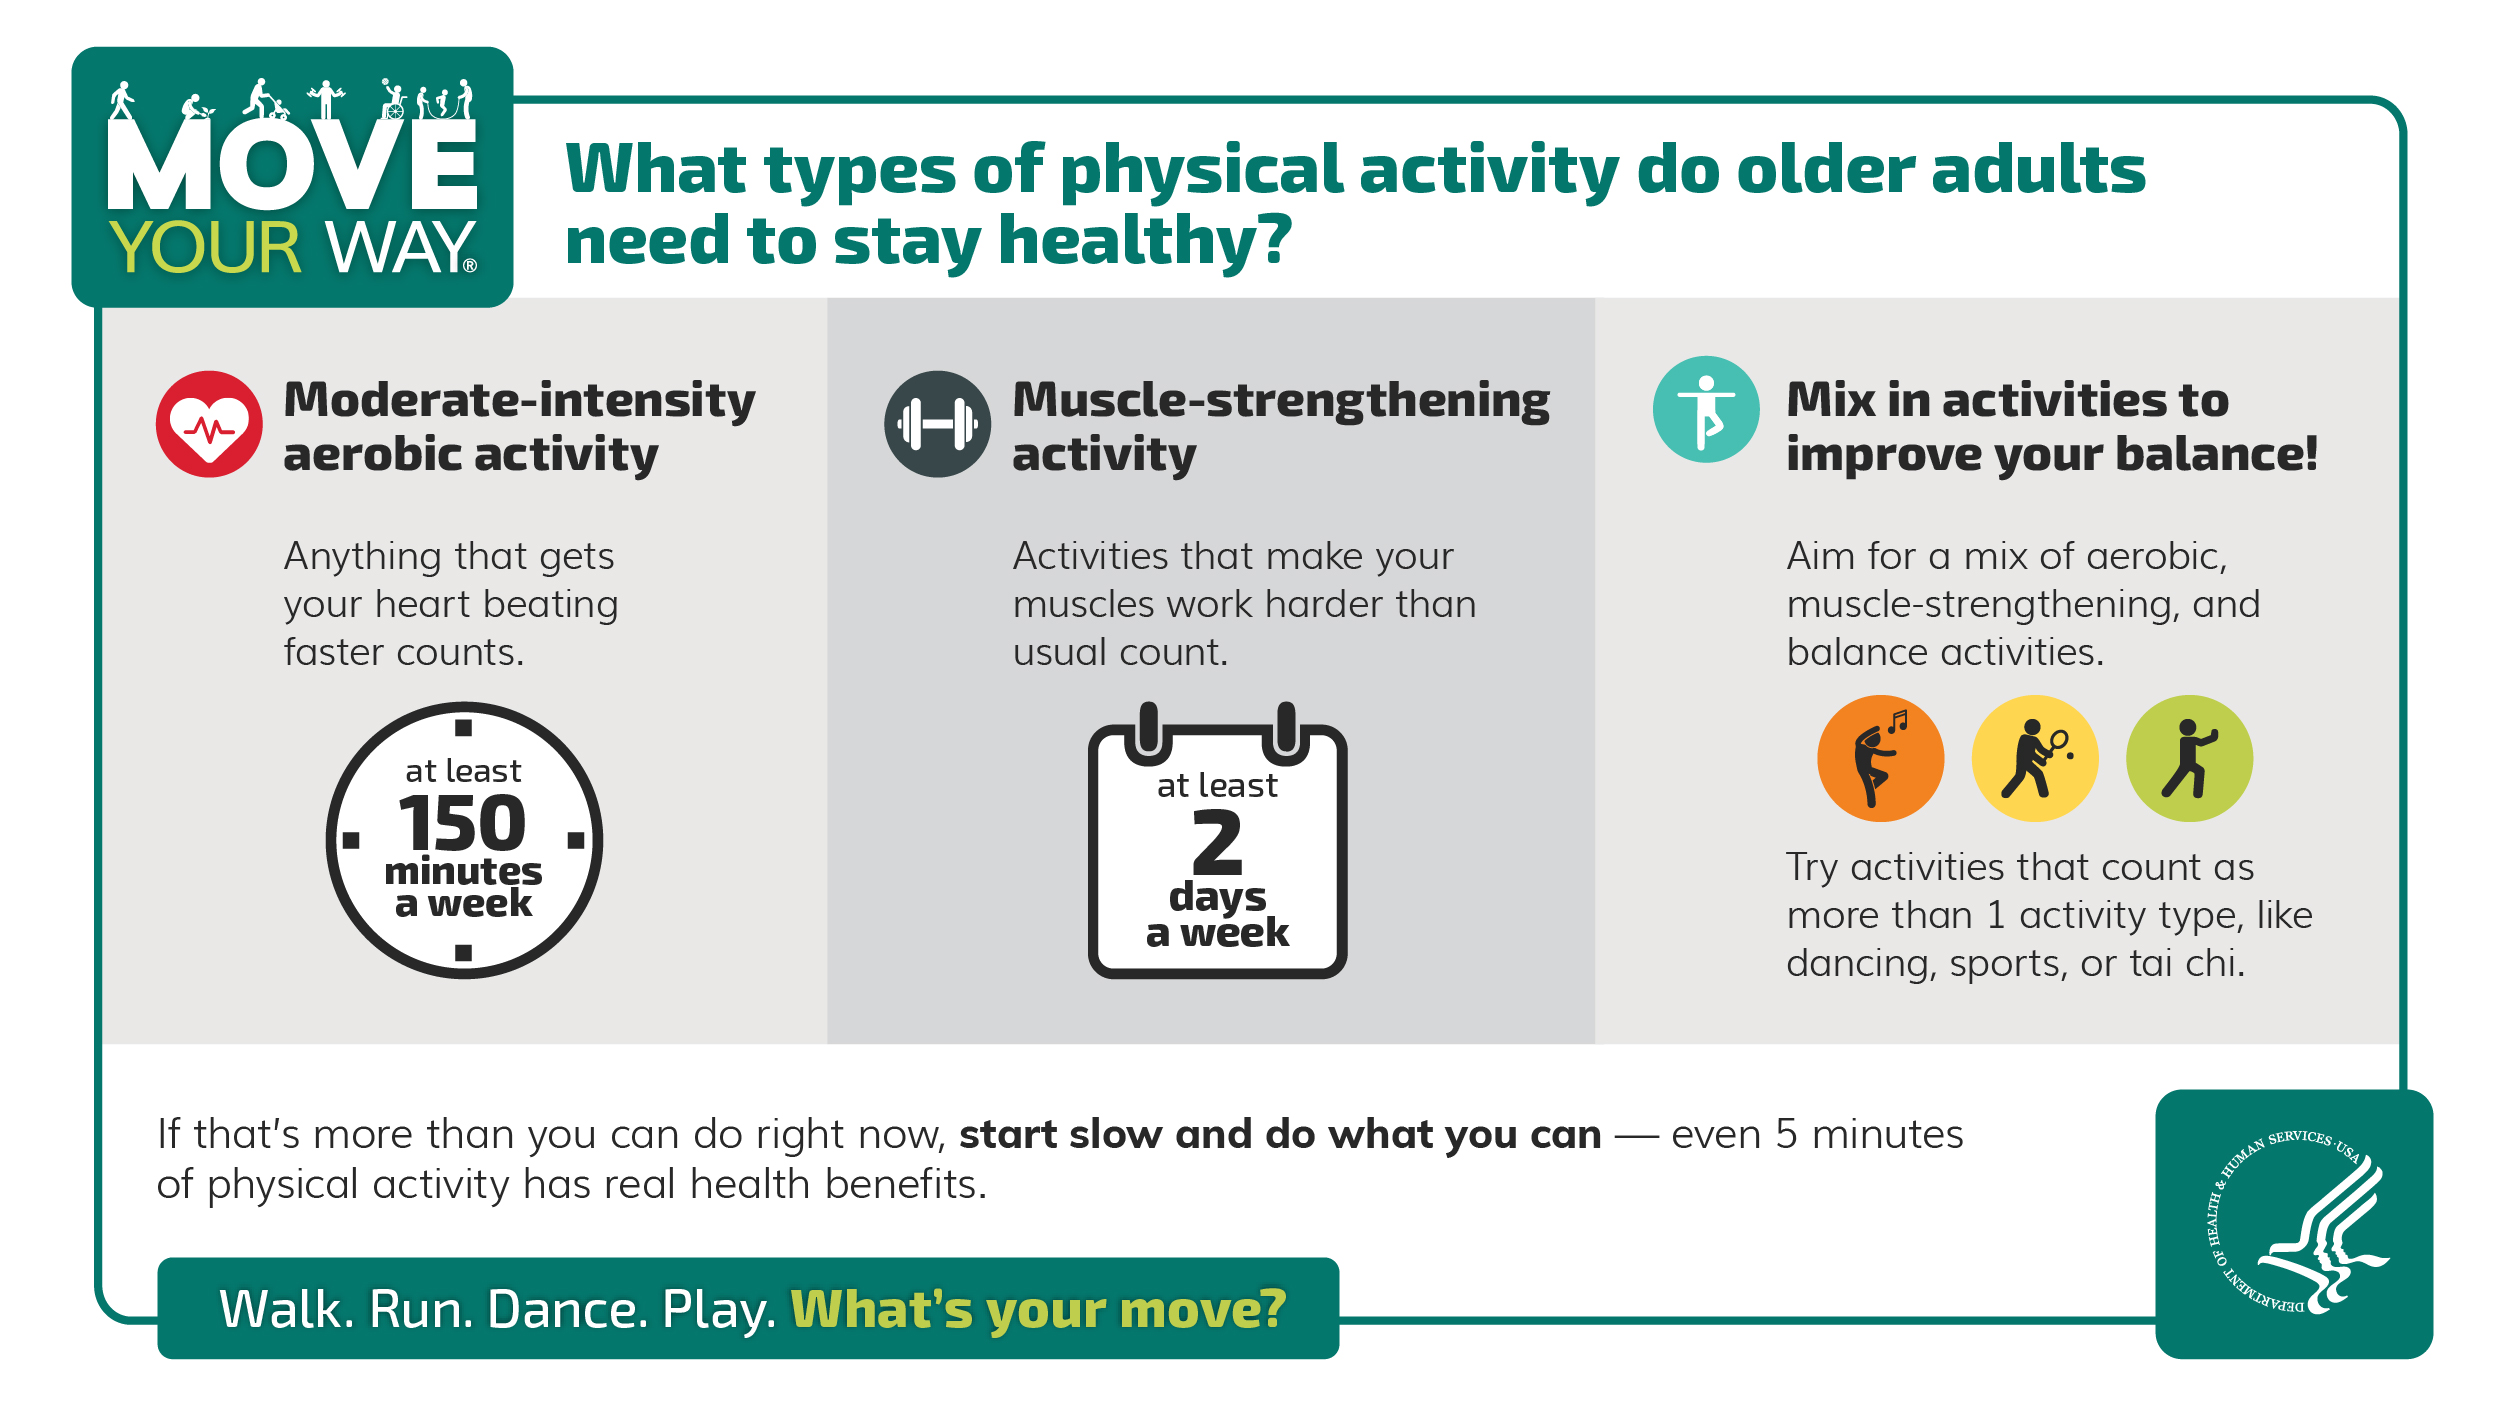 What types of physical activity do older adults need to stay healthy? Moderate-intensity aerobic activity for at least 150 minutes a week. Muscle-strengthening activity at least 2 days a week. Mix in activities to improve your balance! Try activities that count as more than 1 activity type, like dancing, sports, or tai chi. If that’s more than you can do right now, start slow and do what you can - even 5 minutes of physical activity has real health benefits. 